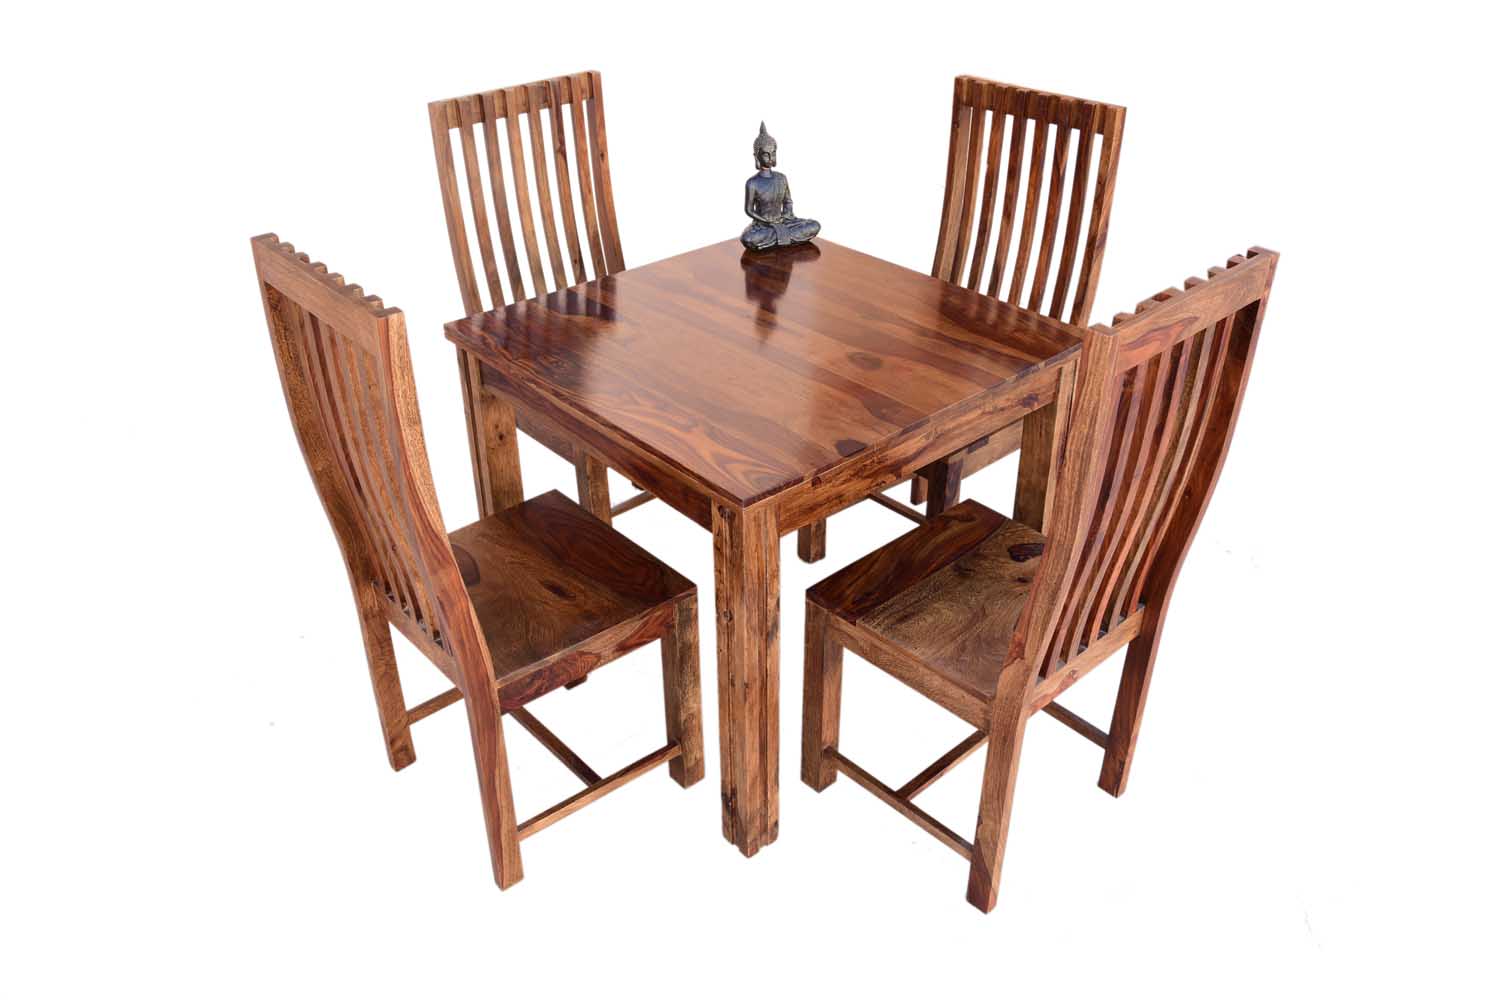 4 seat dining room table